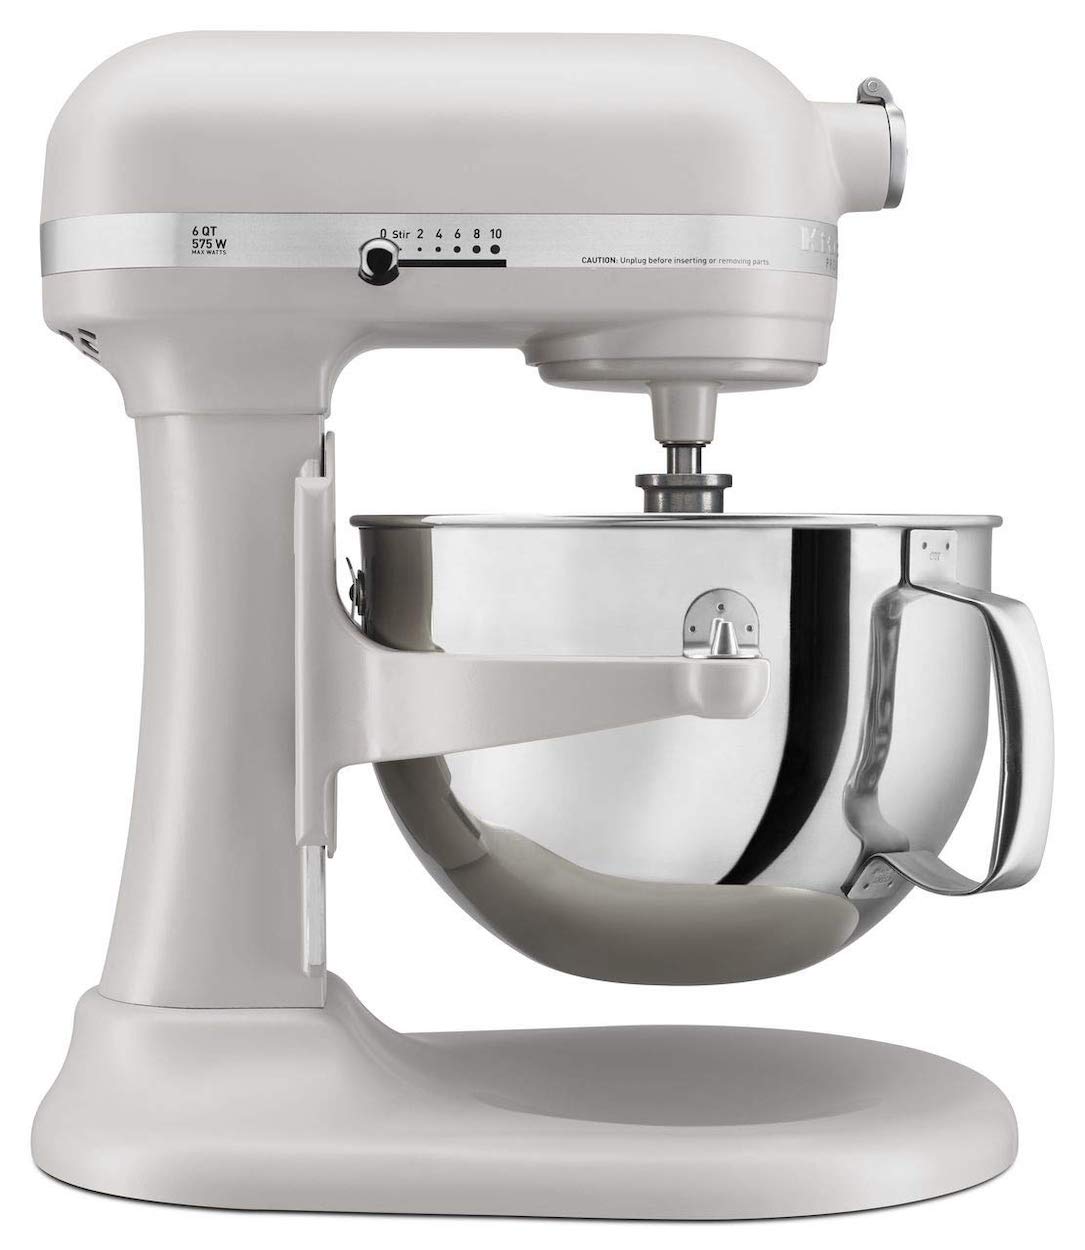 holiday-gift-guide-kitchenaid-6-quart-stand-mixer-eatwell101